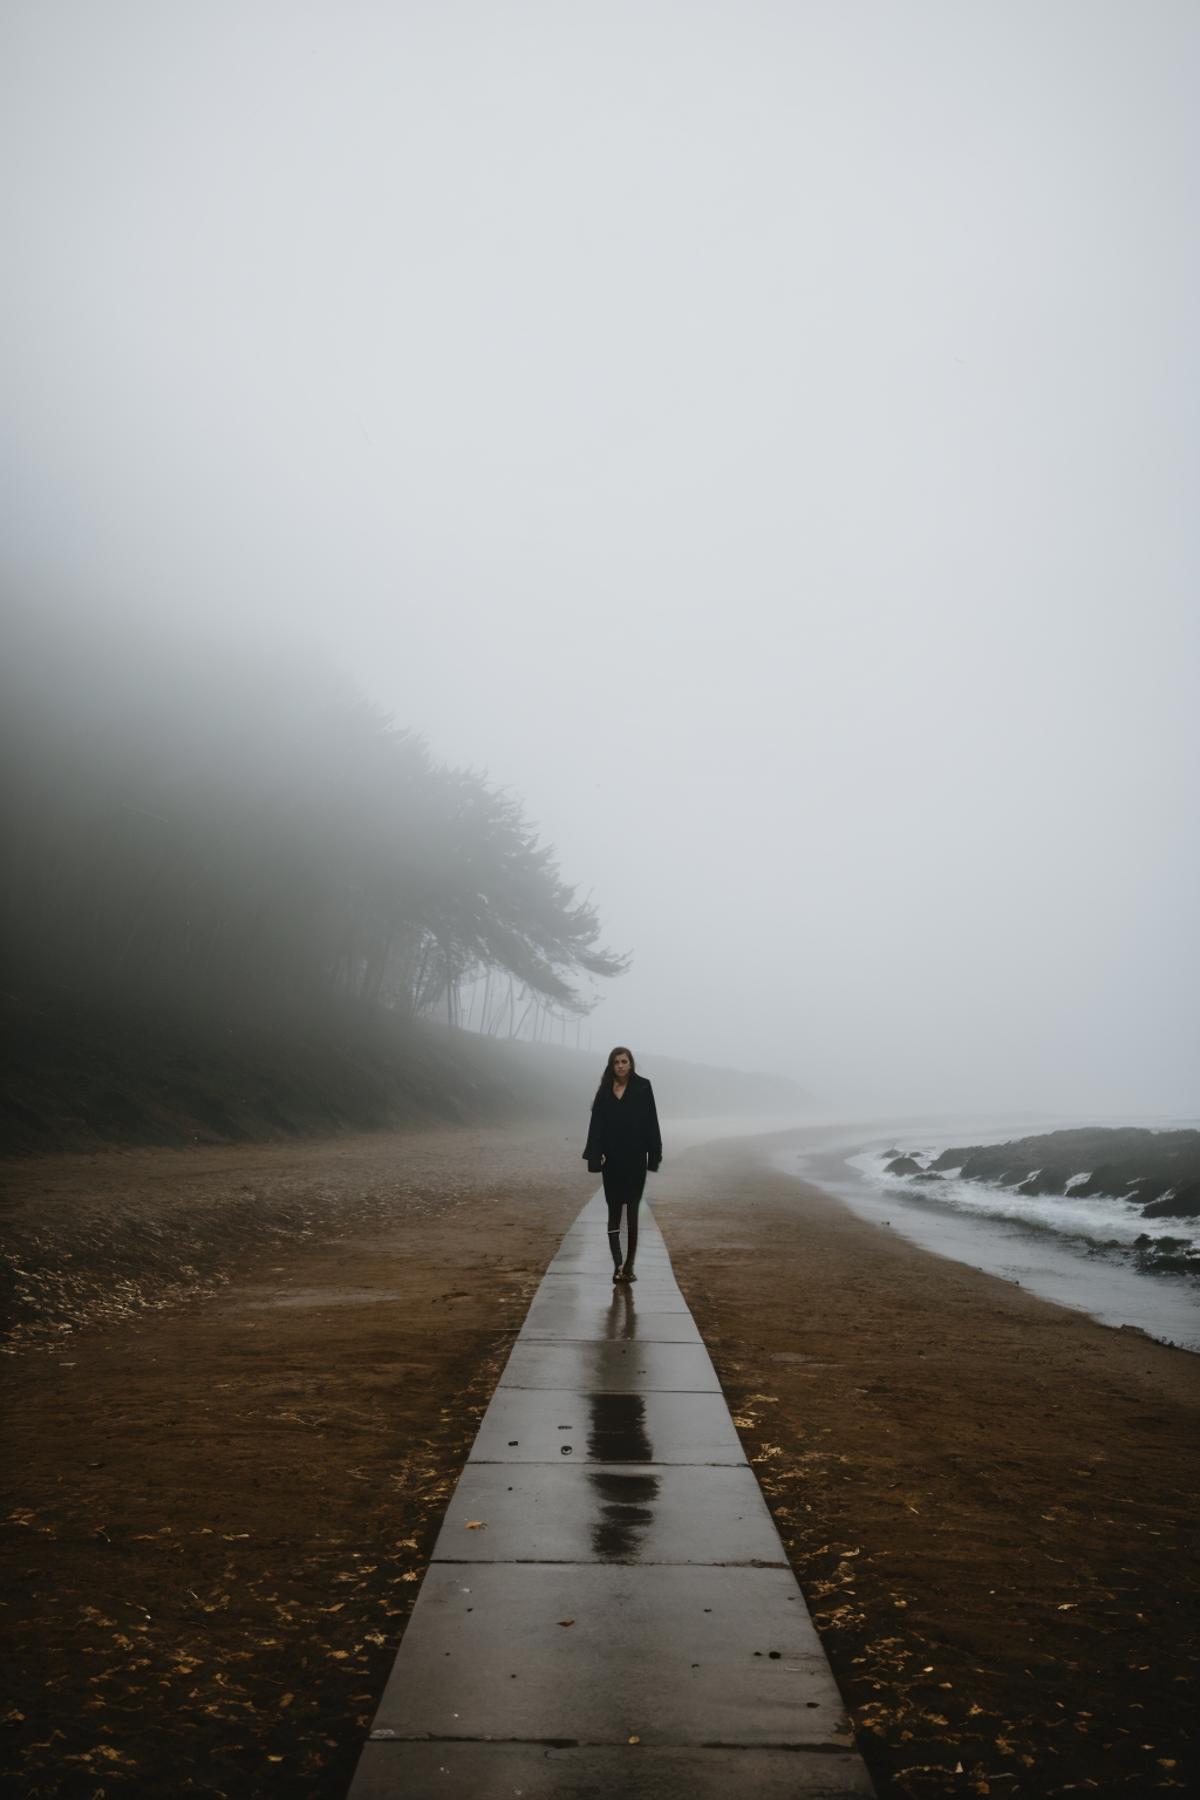 A woman walking on a path near the water in a foggy environment.